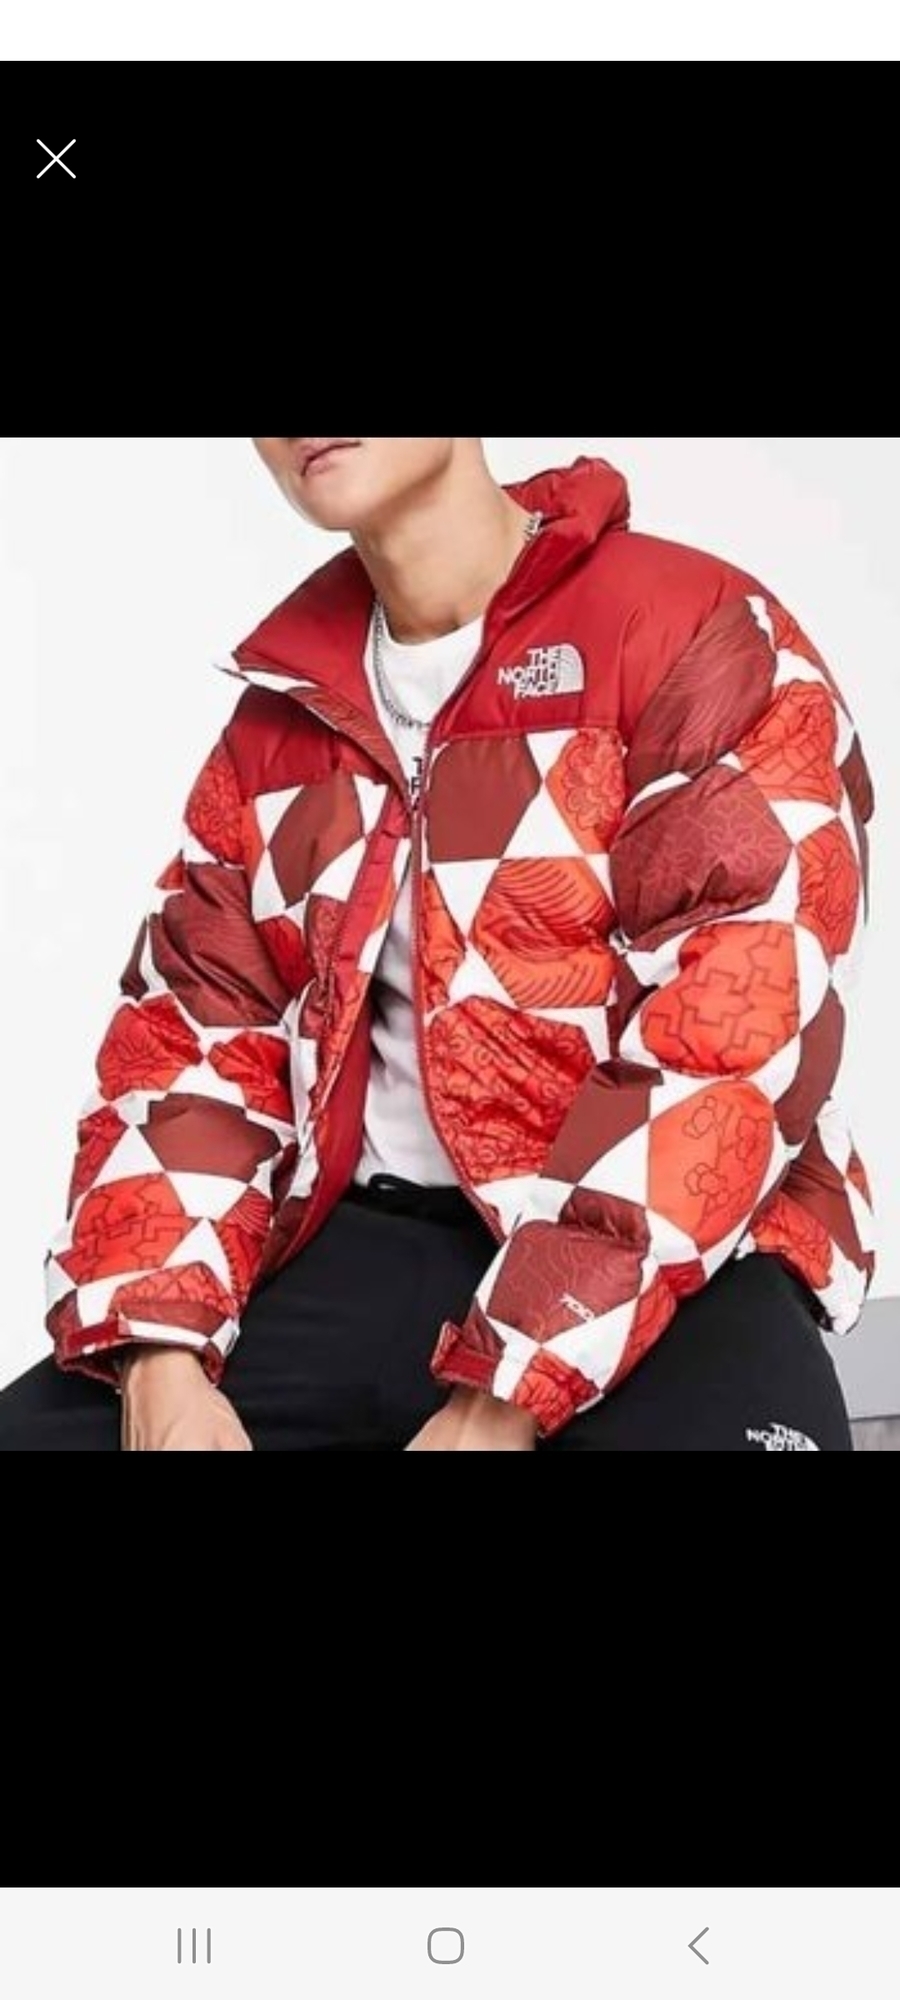 North face 1996 retro print red jacket size M 3